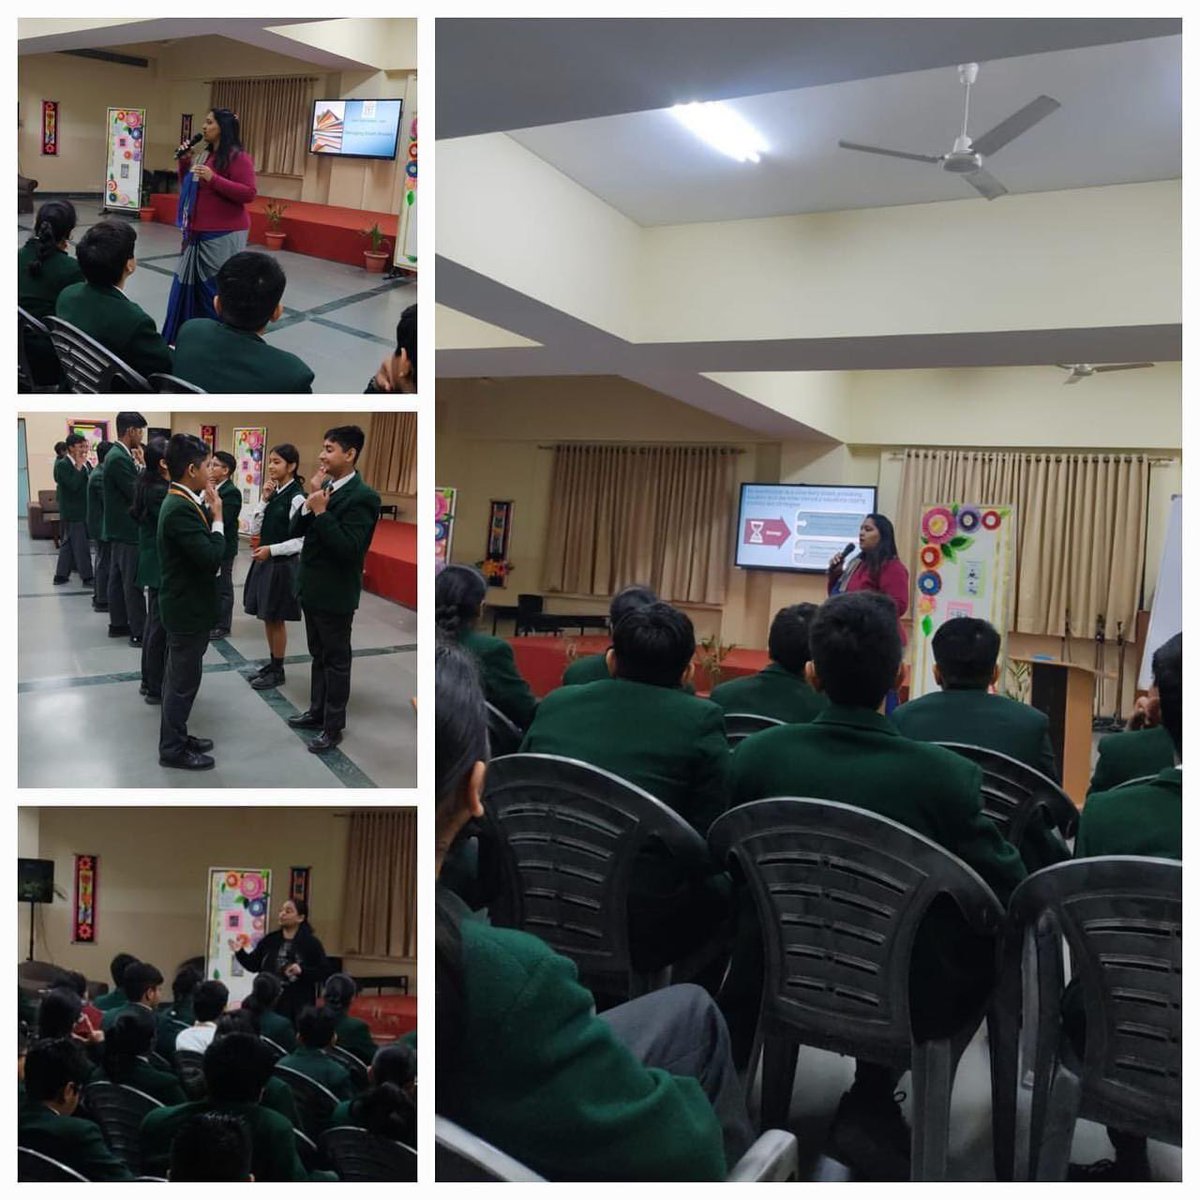 Exam stress? Not here! At DPS Jaipur, we’ve got our middle school students covered with a dedicated session on “Managing Exam Anxiety”.

#StudentWellbeing 
#ExamAnxiety 
#SupportingStudents 
#dpsjaipur 
#dps 
#dpsschools 
#bestschoolinjaipur 
#bestboardingschoolinjaipur